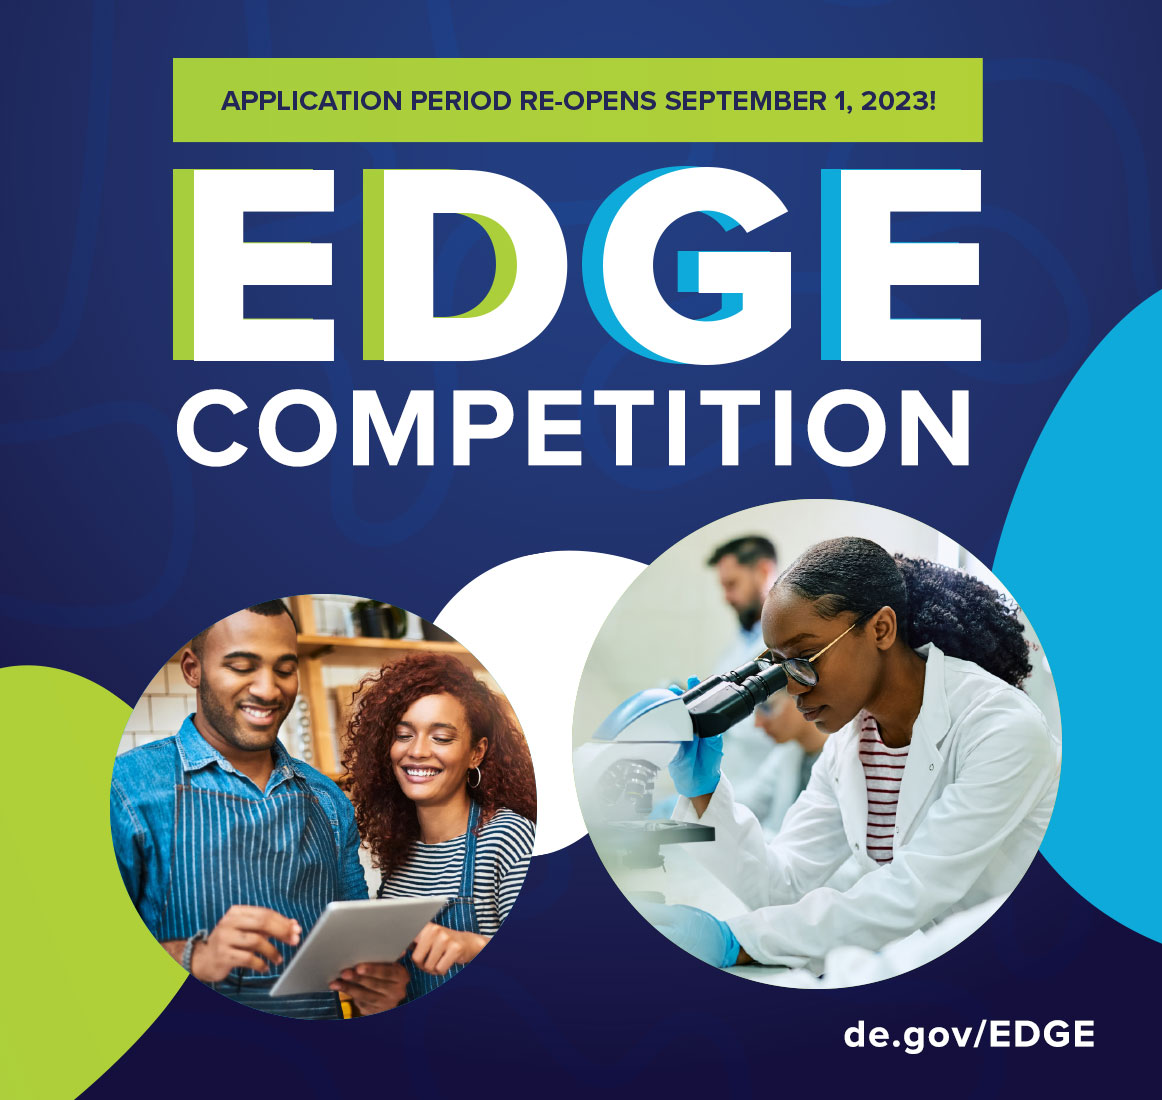 EDGE Competition Reopens Sept. 1 to Benefit Small Businesses